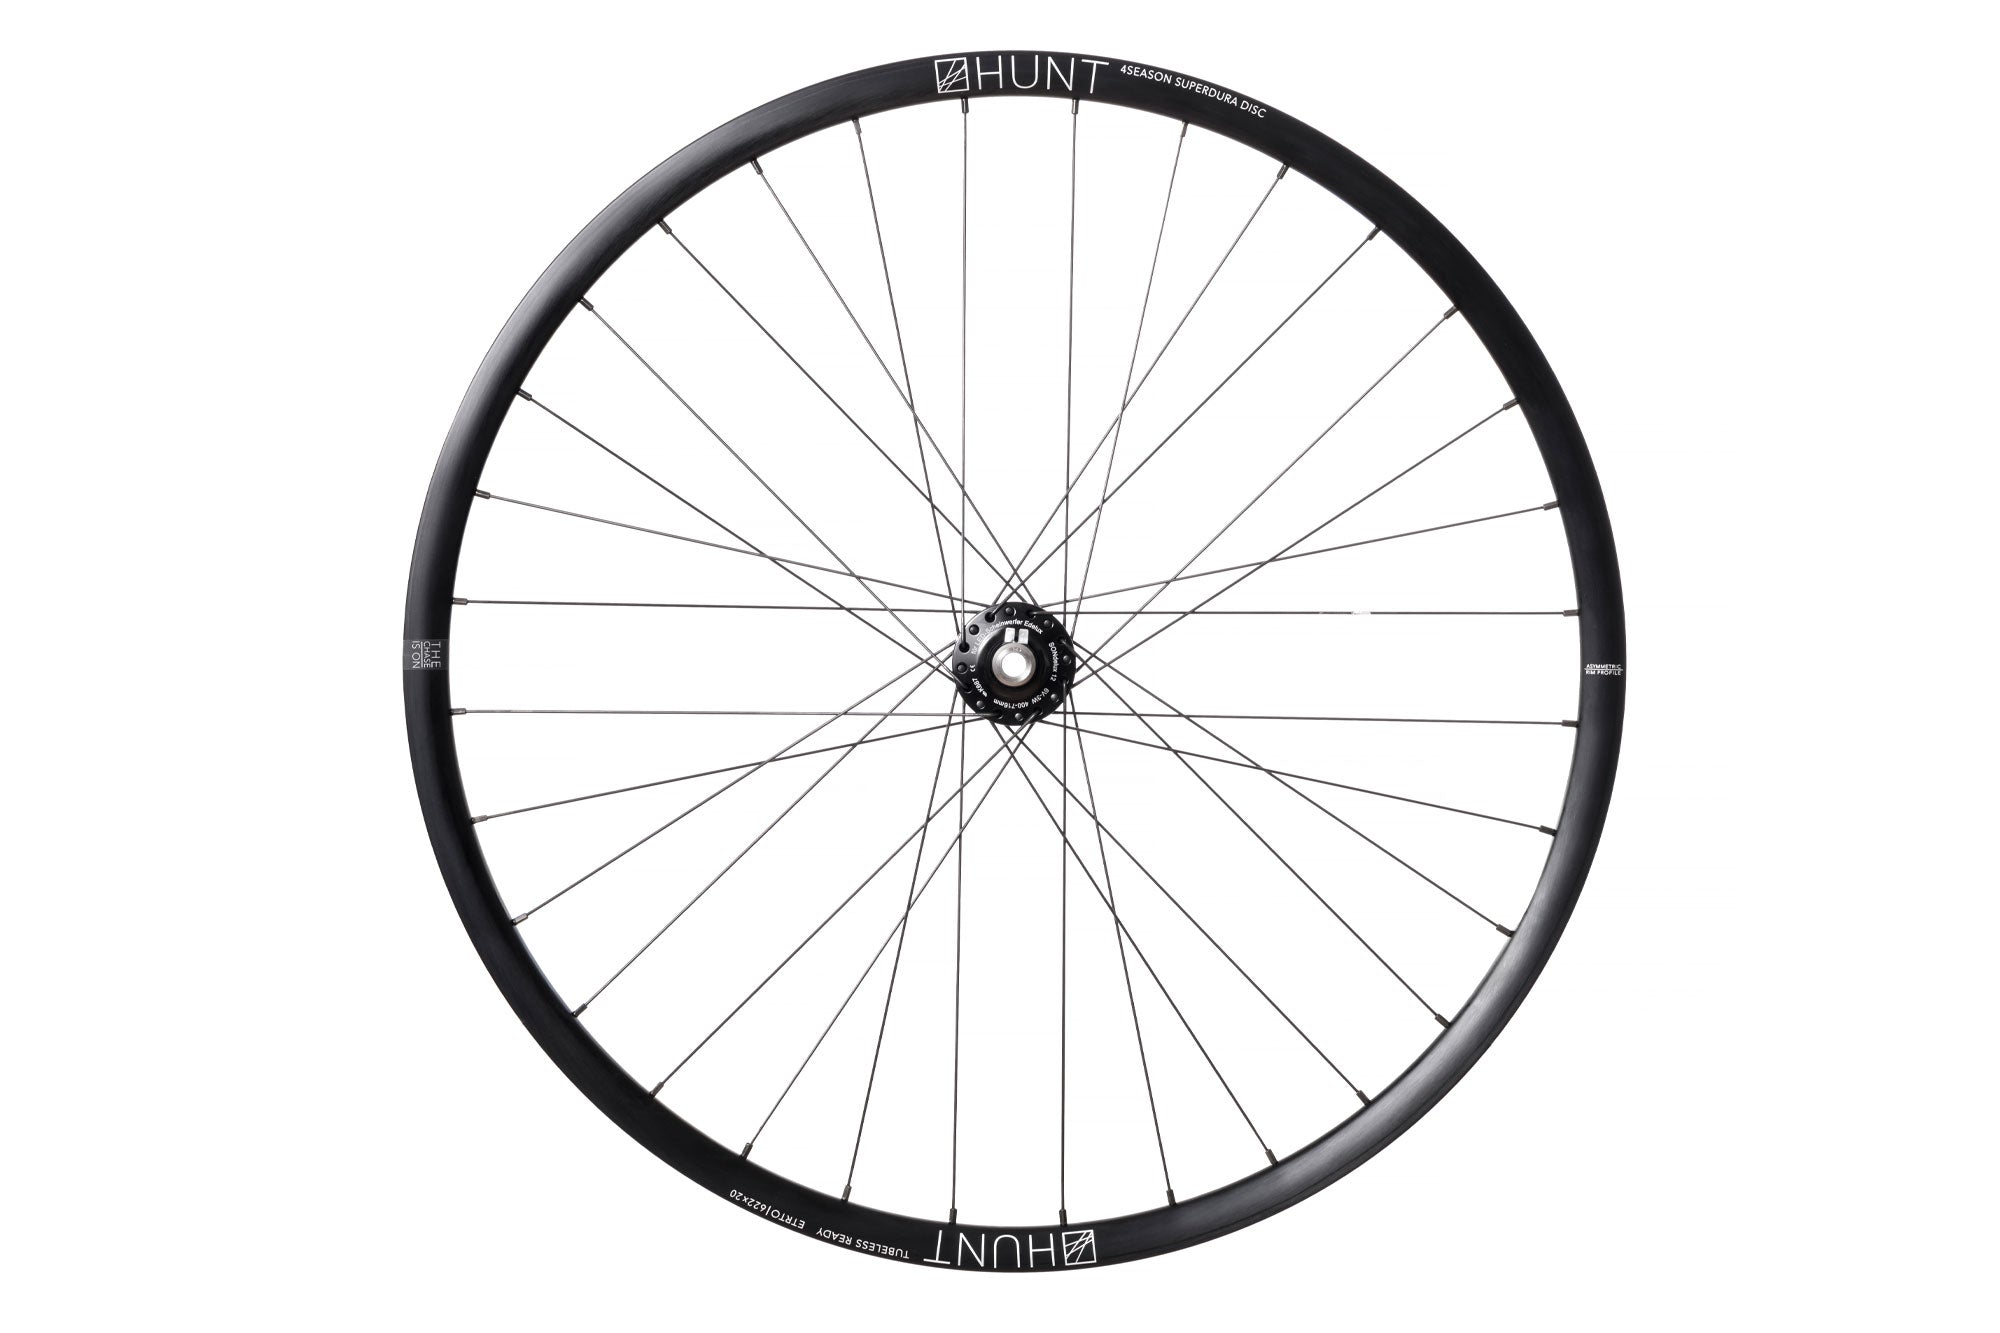 <h1>Rims</h1><i>A strong and lightweight 6061-T6 heat-treated rim features an asymmetric shape which is inverted from front to rear to provide balanced higher spoke tensions meaning your spokes stay tight for the long term. The rim profile is disc specific which allows higher-strength to weight as no reinforcement is required for a braking surface. The extra wide rim at 25mm (20mm internal) which creates a great tyre profile with wider 25-50mm tyres, giving excellent grip and lower rolling resistance.</i>